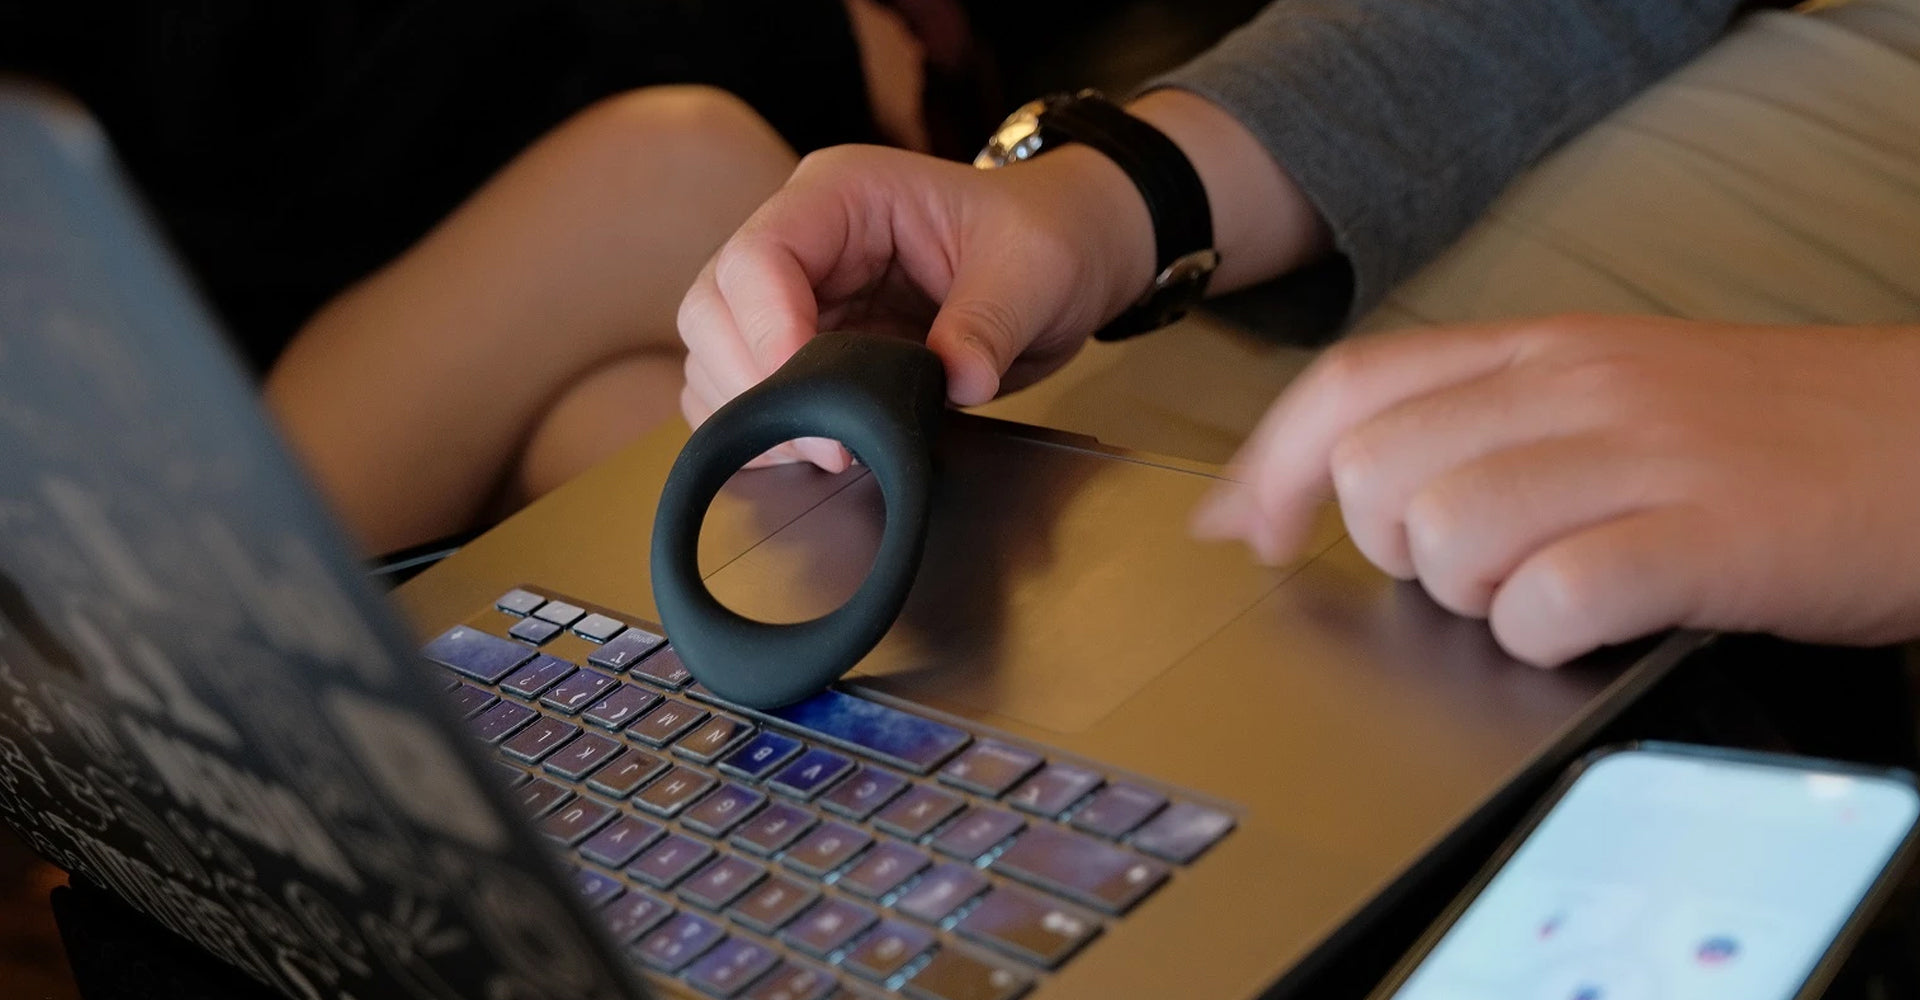 couples holding a lovense cock ring connection onto a laptop for app controlled